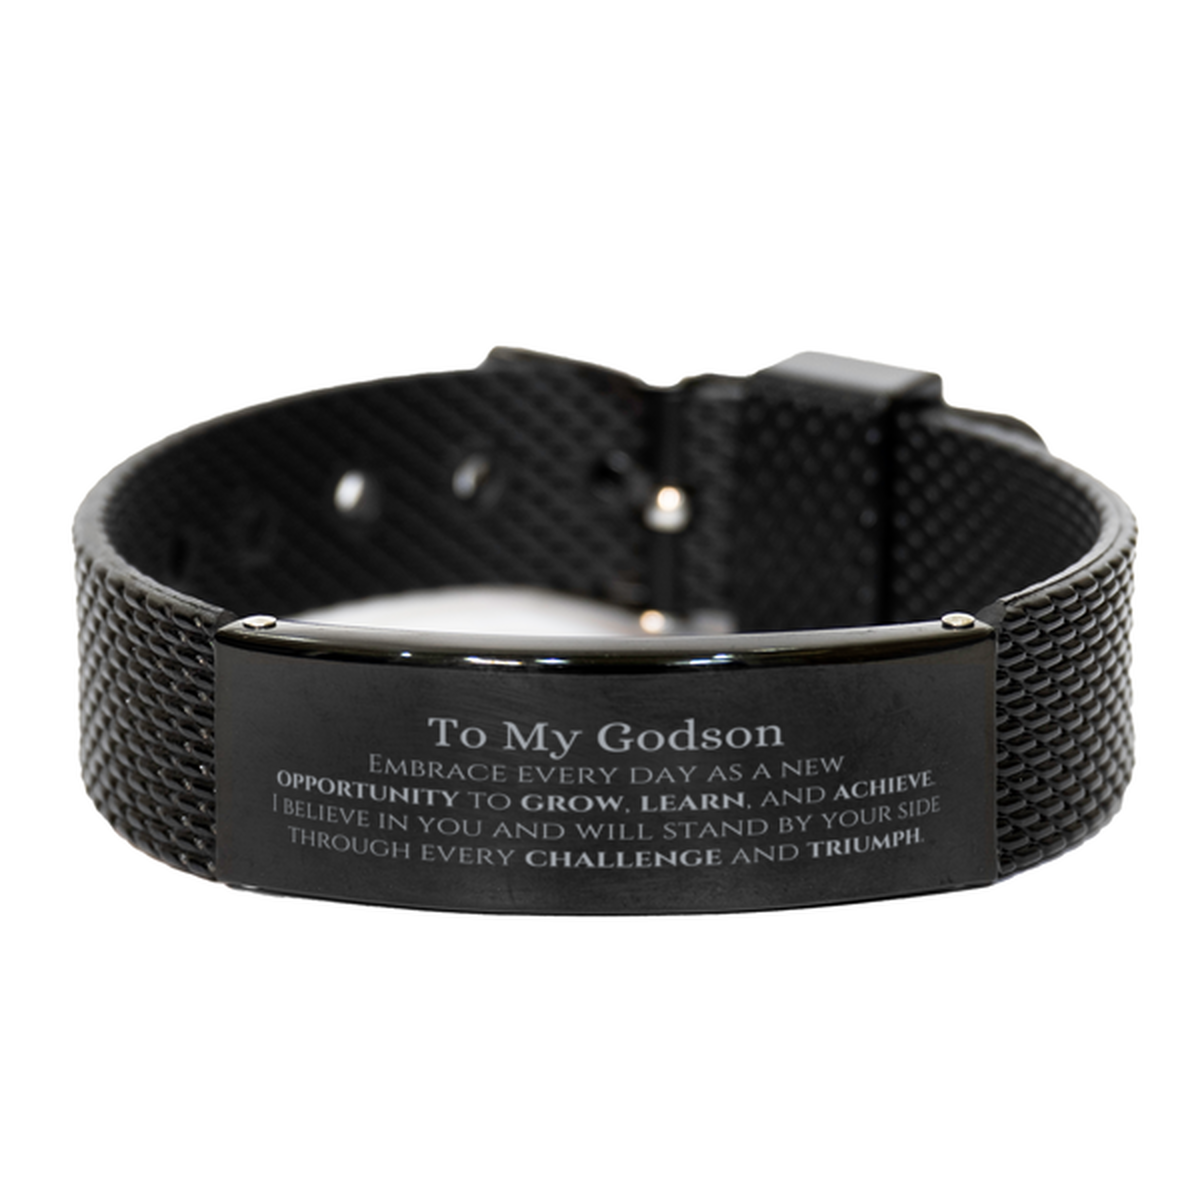 To My Godson Gifts, I believe in you and will stand by your side, Inspirational Black Shark Mesh Bracelet For Godson, Birthday Christmas Motivational Godson Gifts